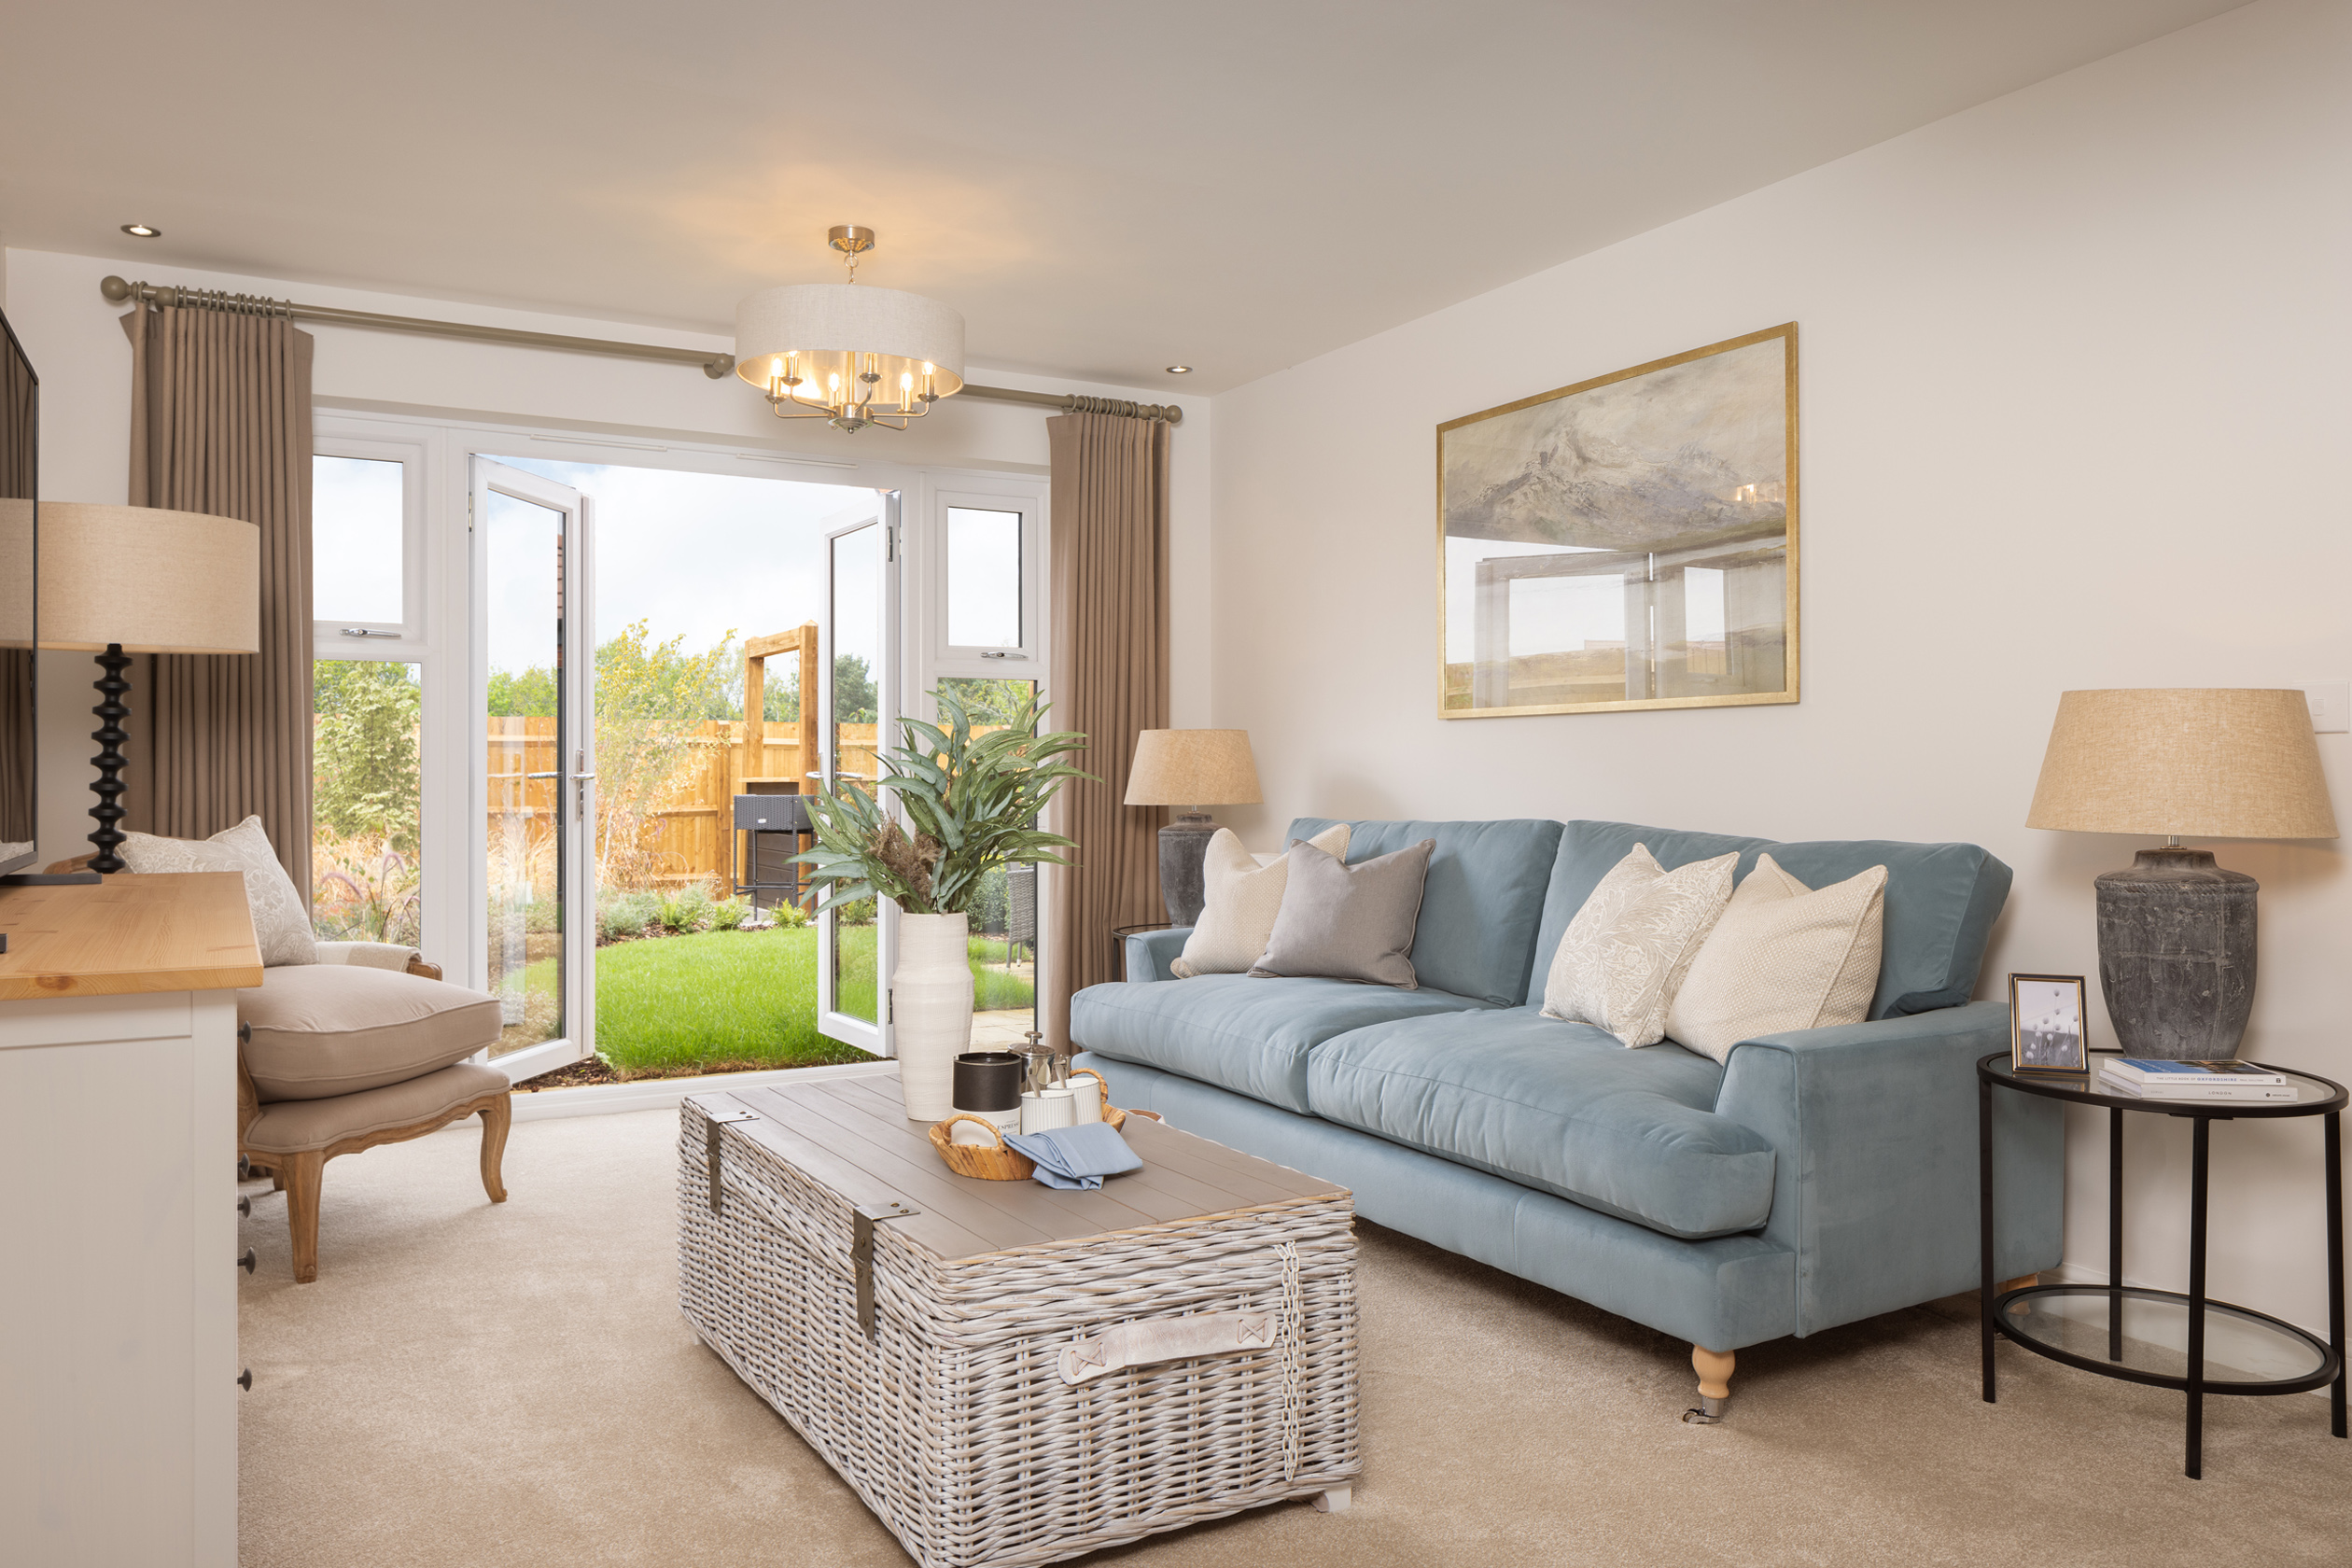 Property 3 of 9. Manning Lounge Show Home In Abingdon